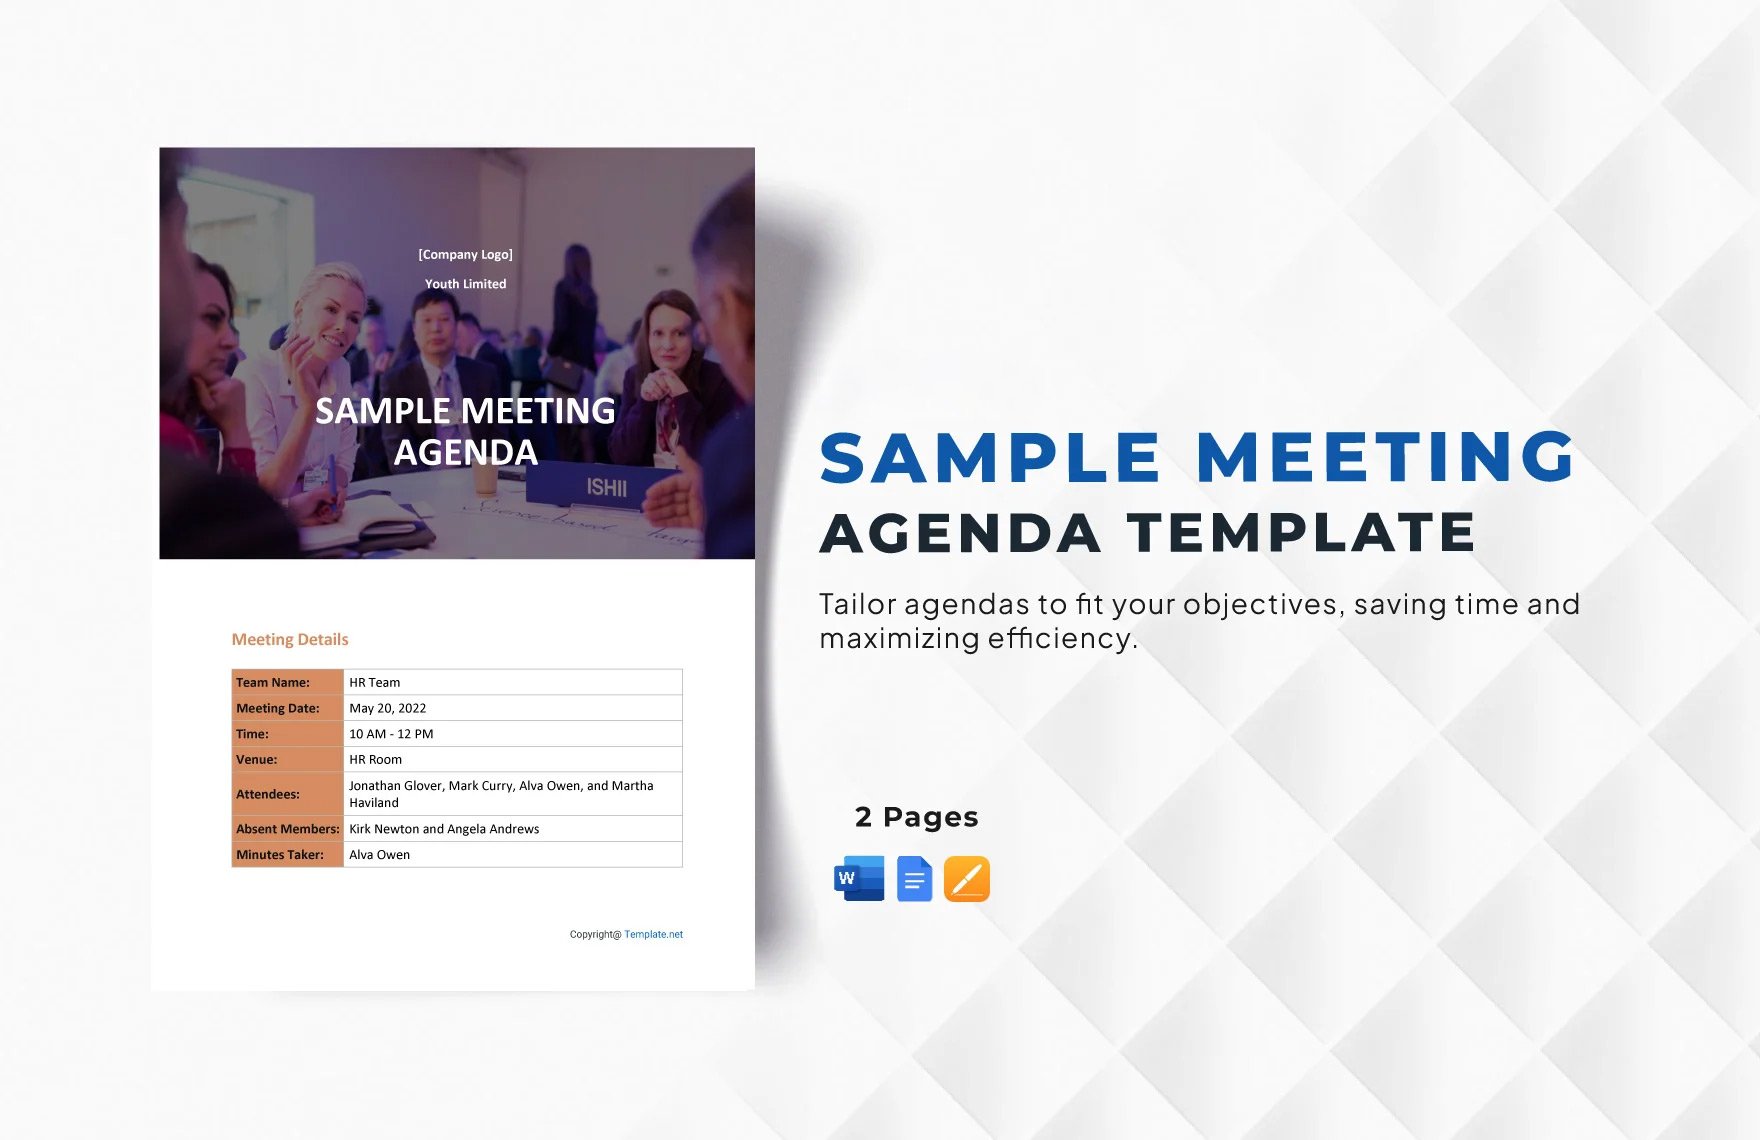 Sample Meeting Agenda Template in Word, Google Docs, Apple Pages